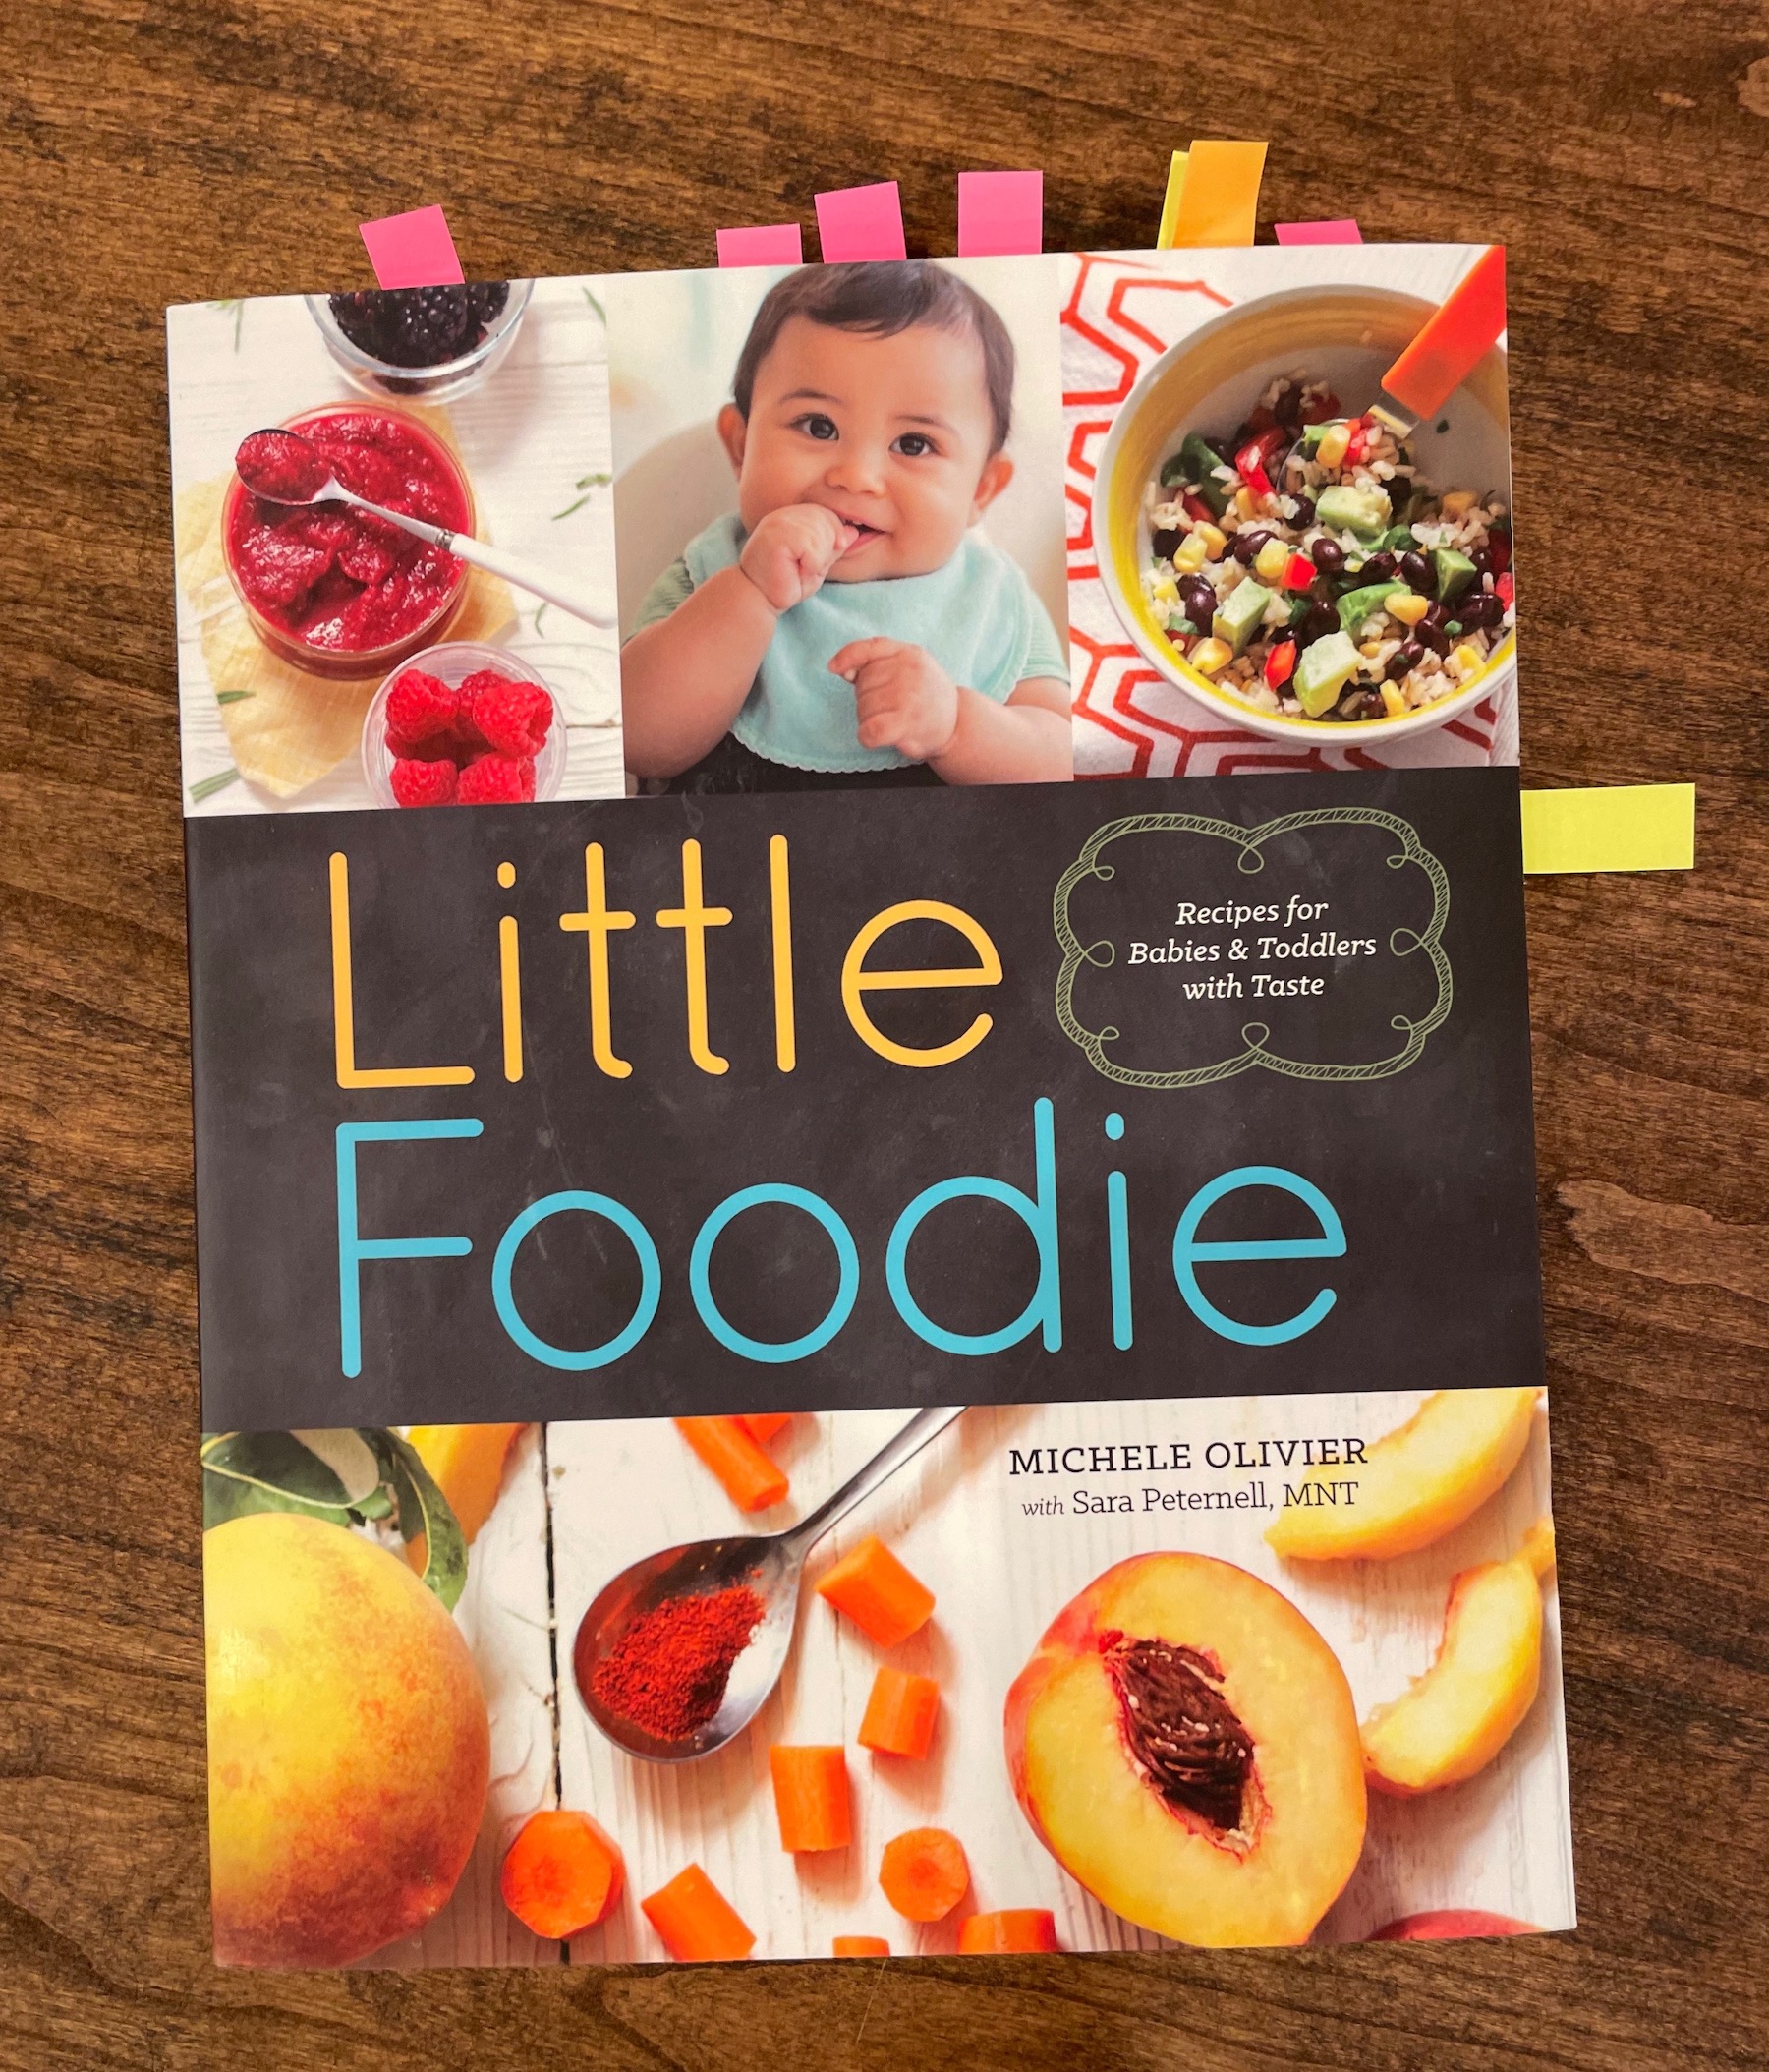 Little Foodie Cookbook Cover with post-its marking recipes to try